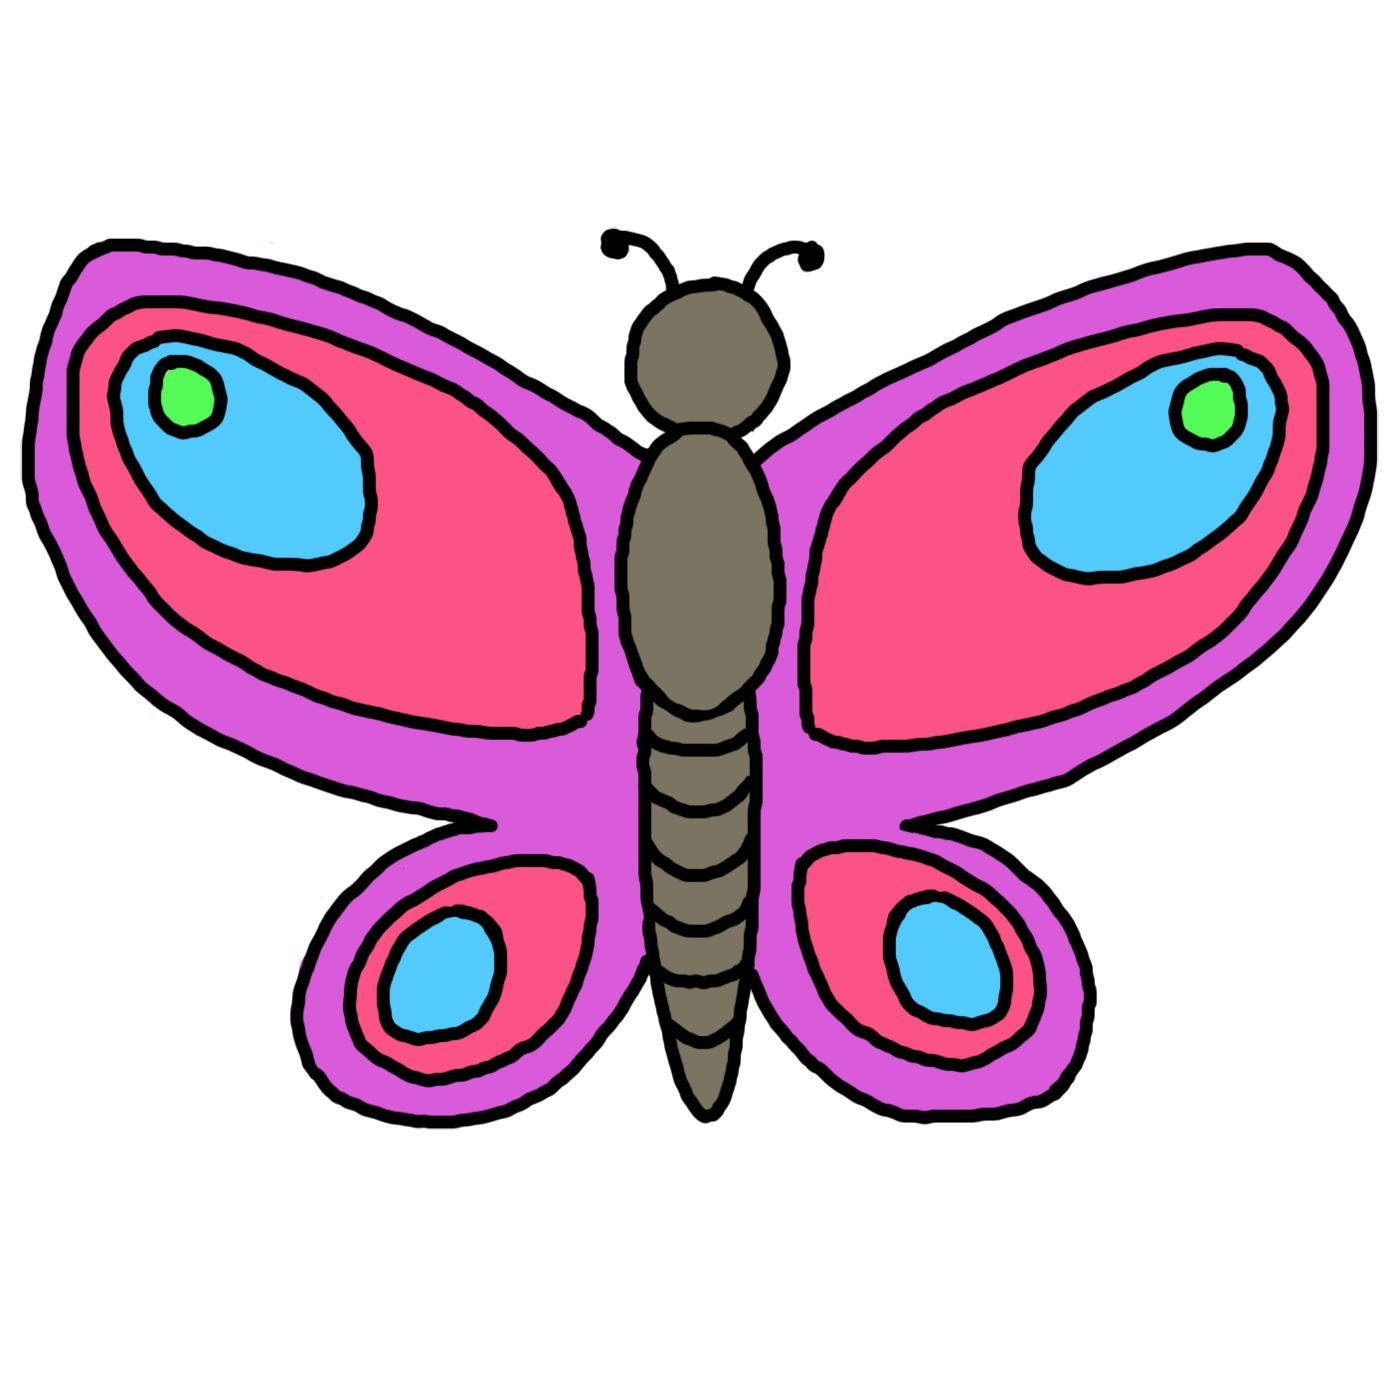 Simple Butterfly Clip Art Widescreen 2 HD Wallpapers | amagico.